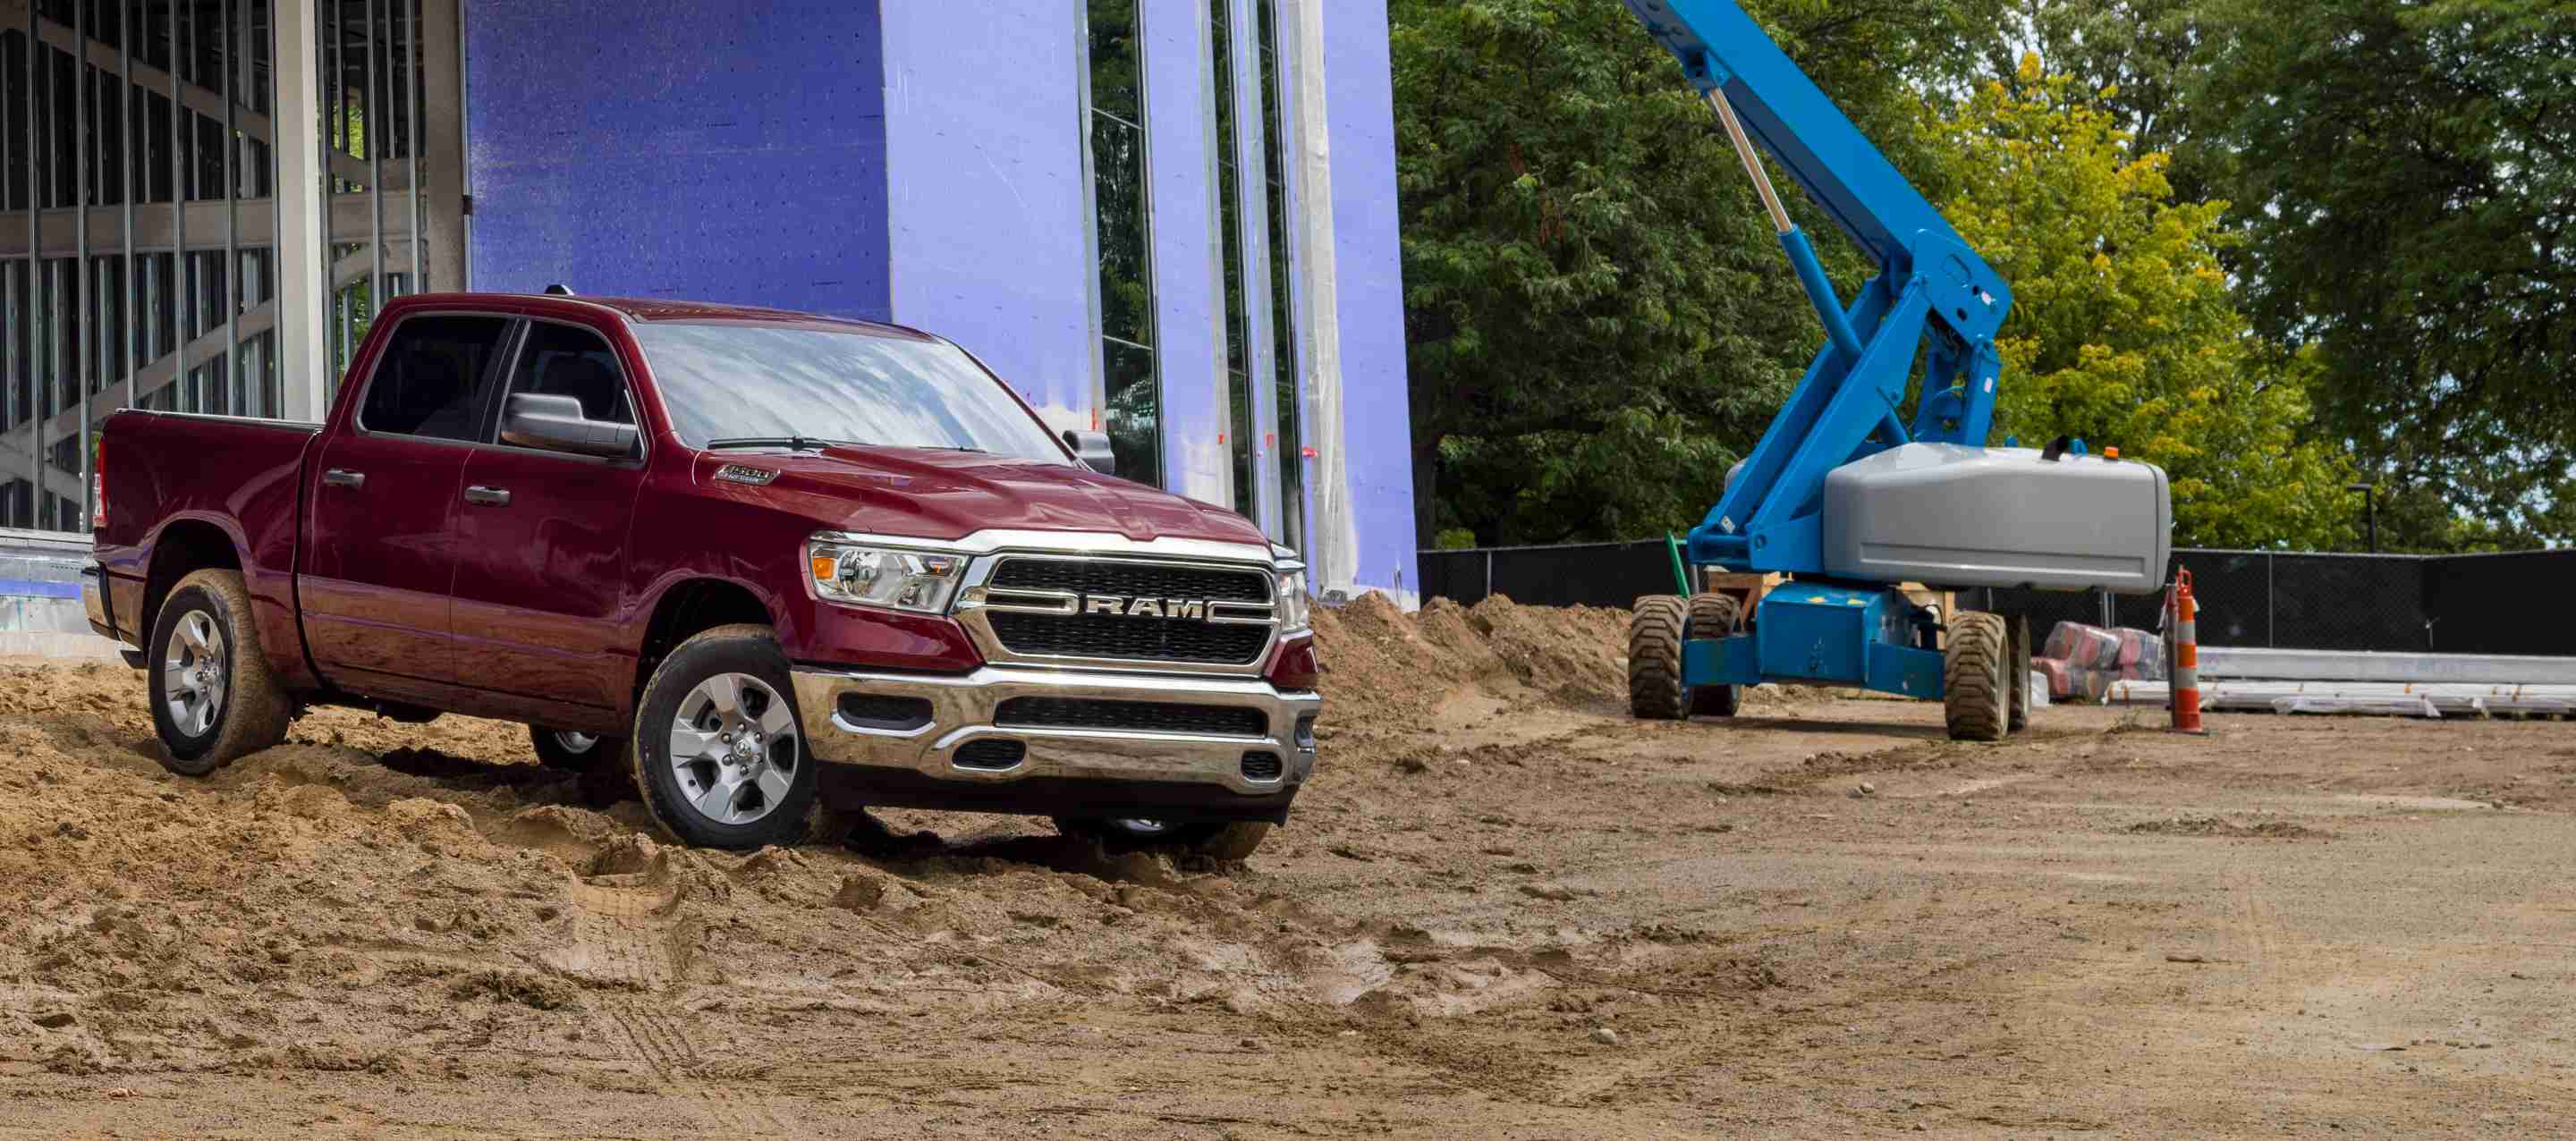 A red 2023 Ram 1500 Tradesman 4x4 Crew Cab parked at a commercial building site.